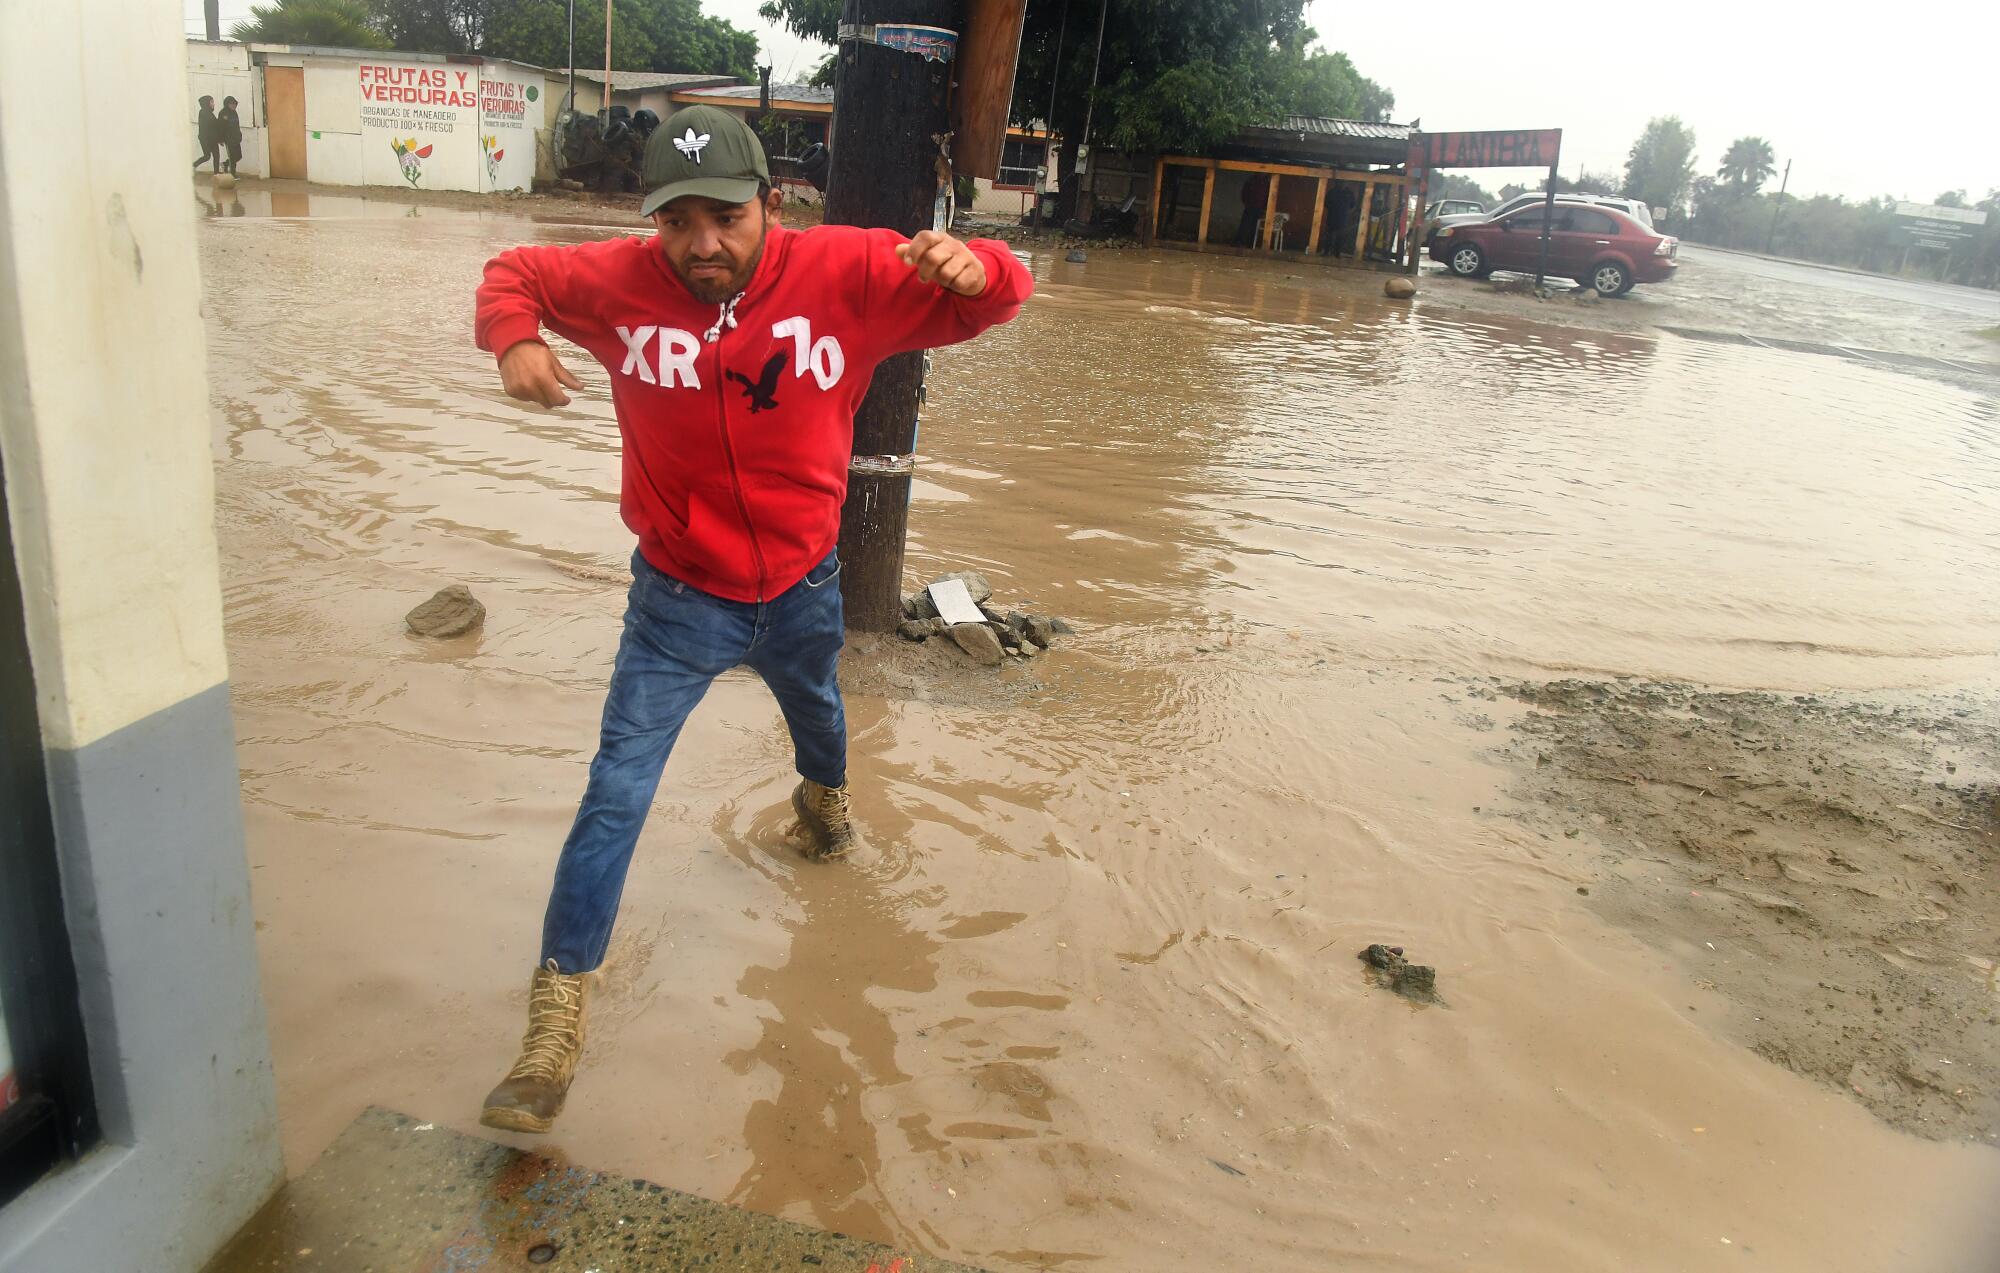 A man takes large steps to avoid getting wet in a giant puddle of muddy water.